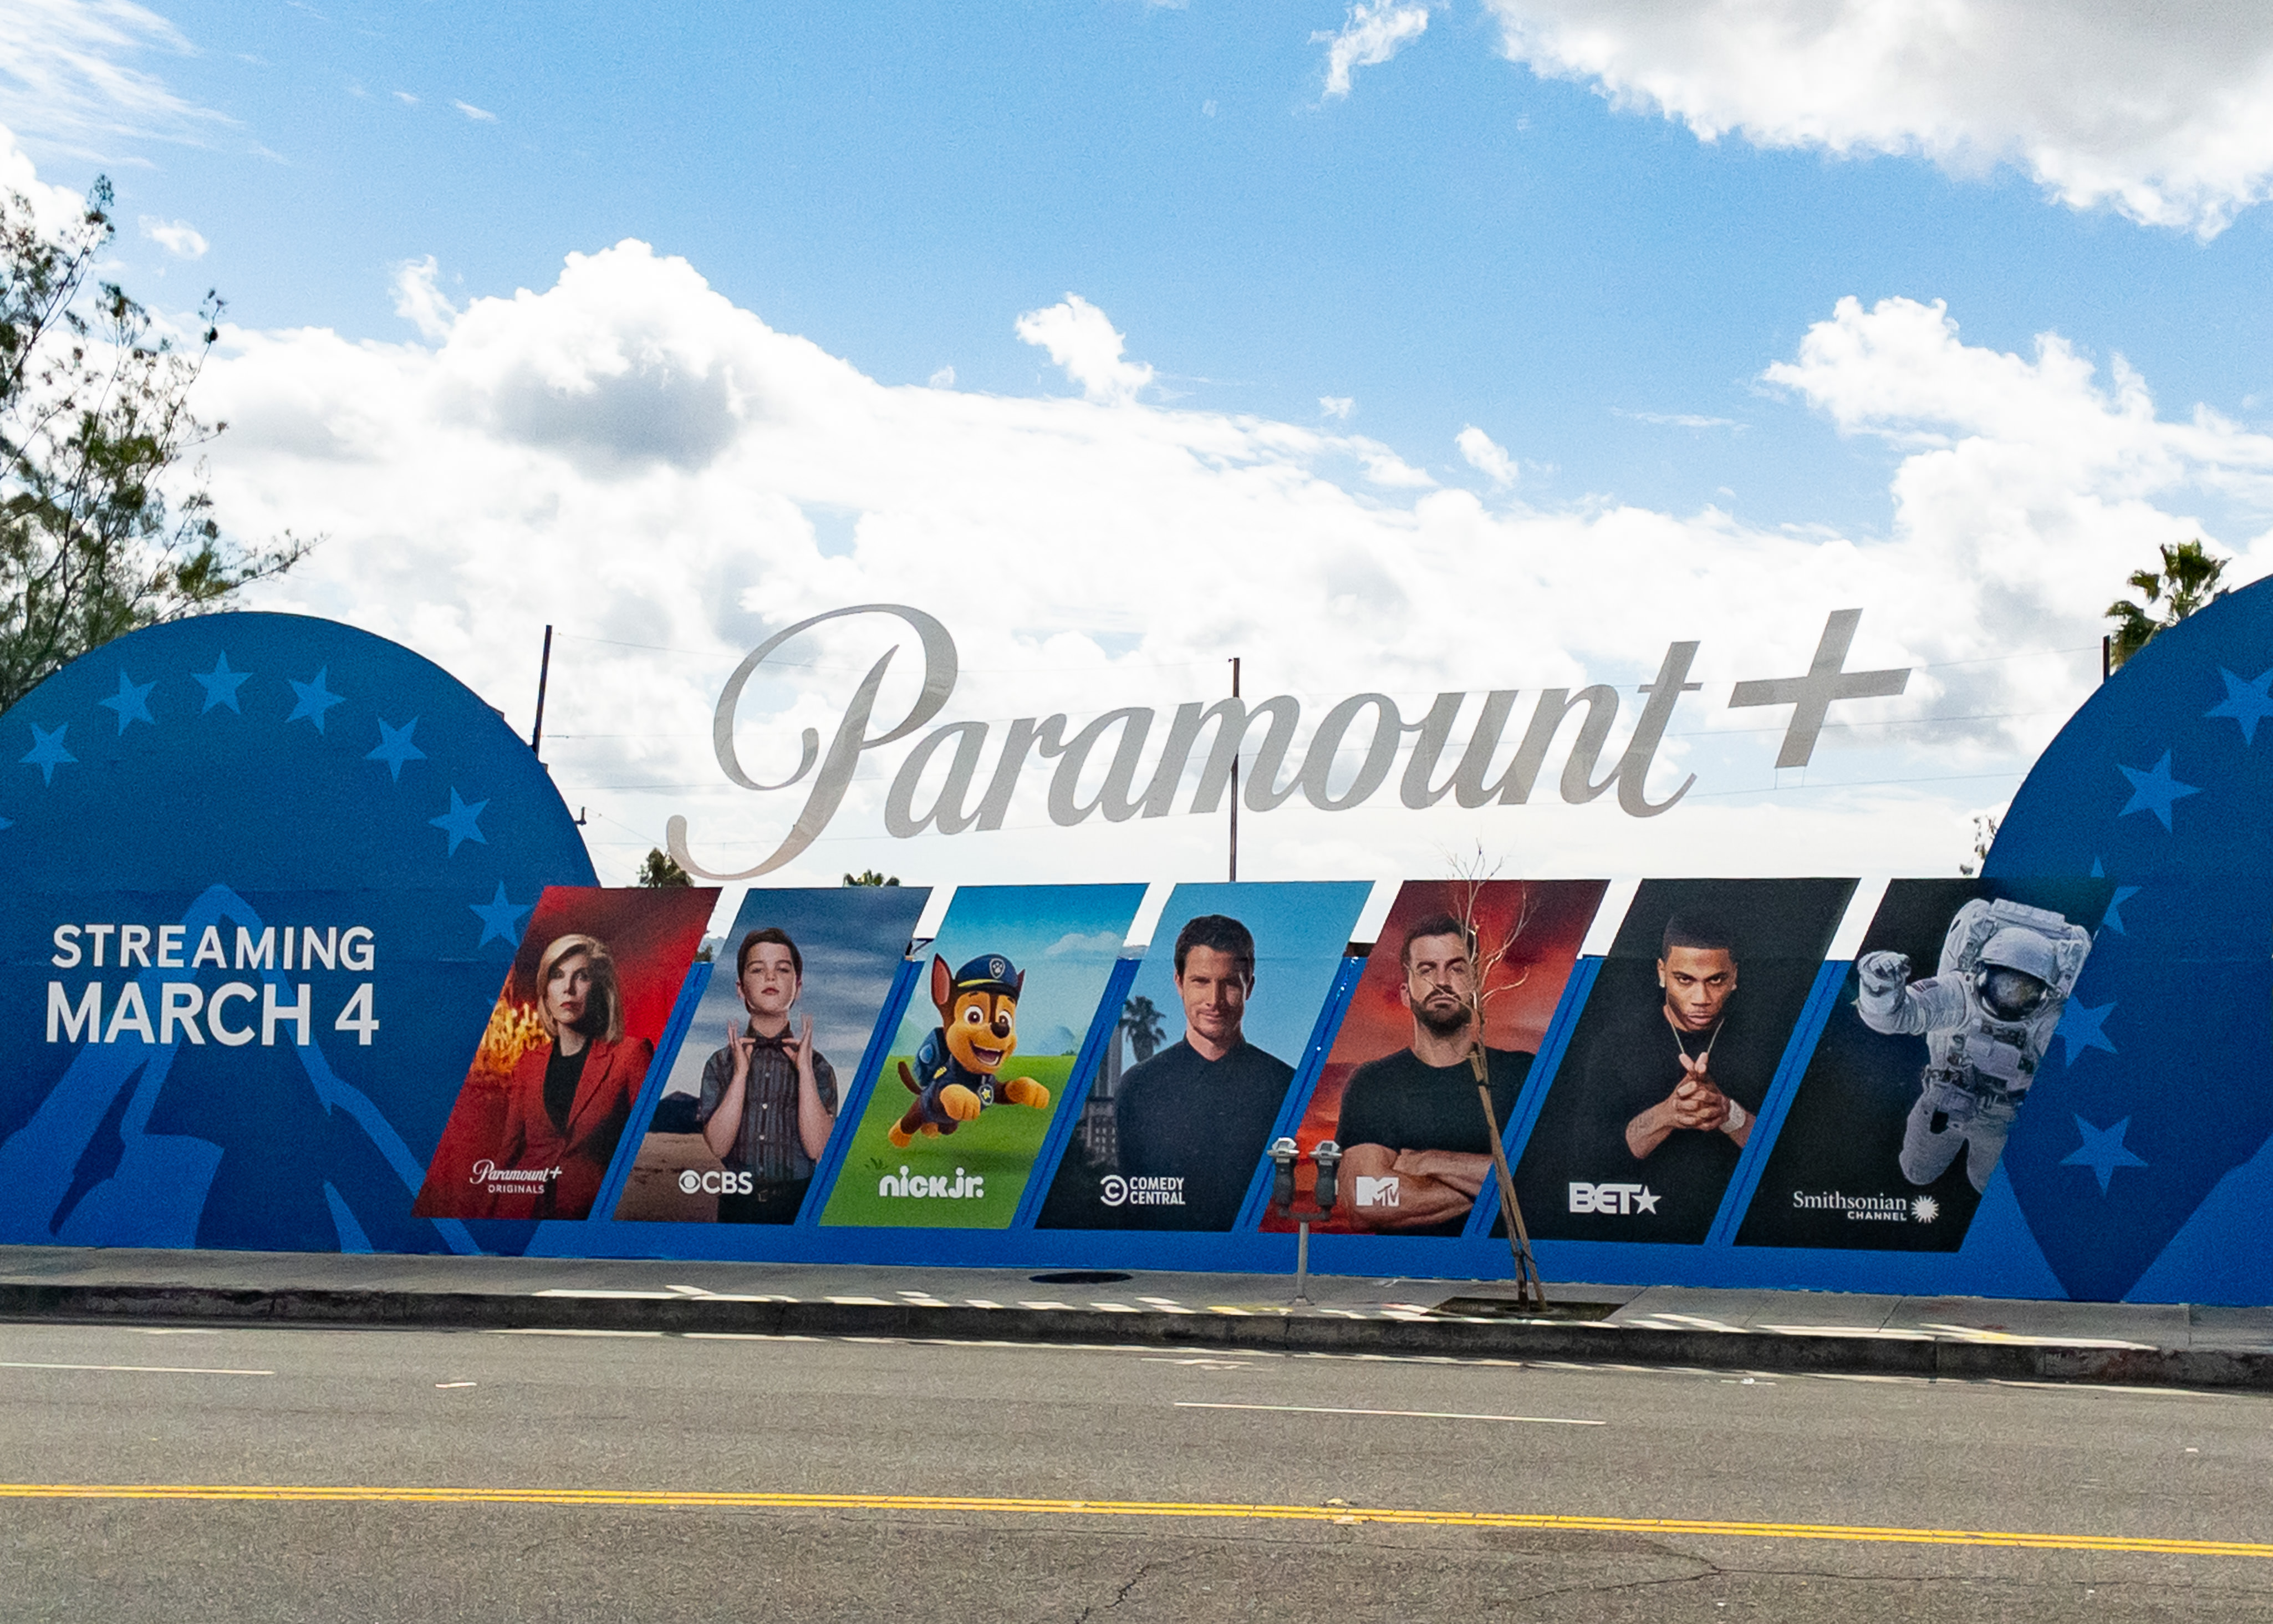 General views of the Paramount+ billboard campaign